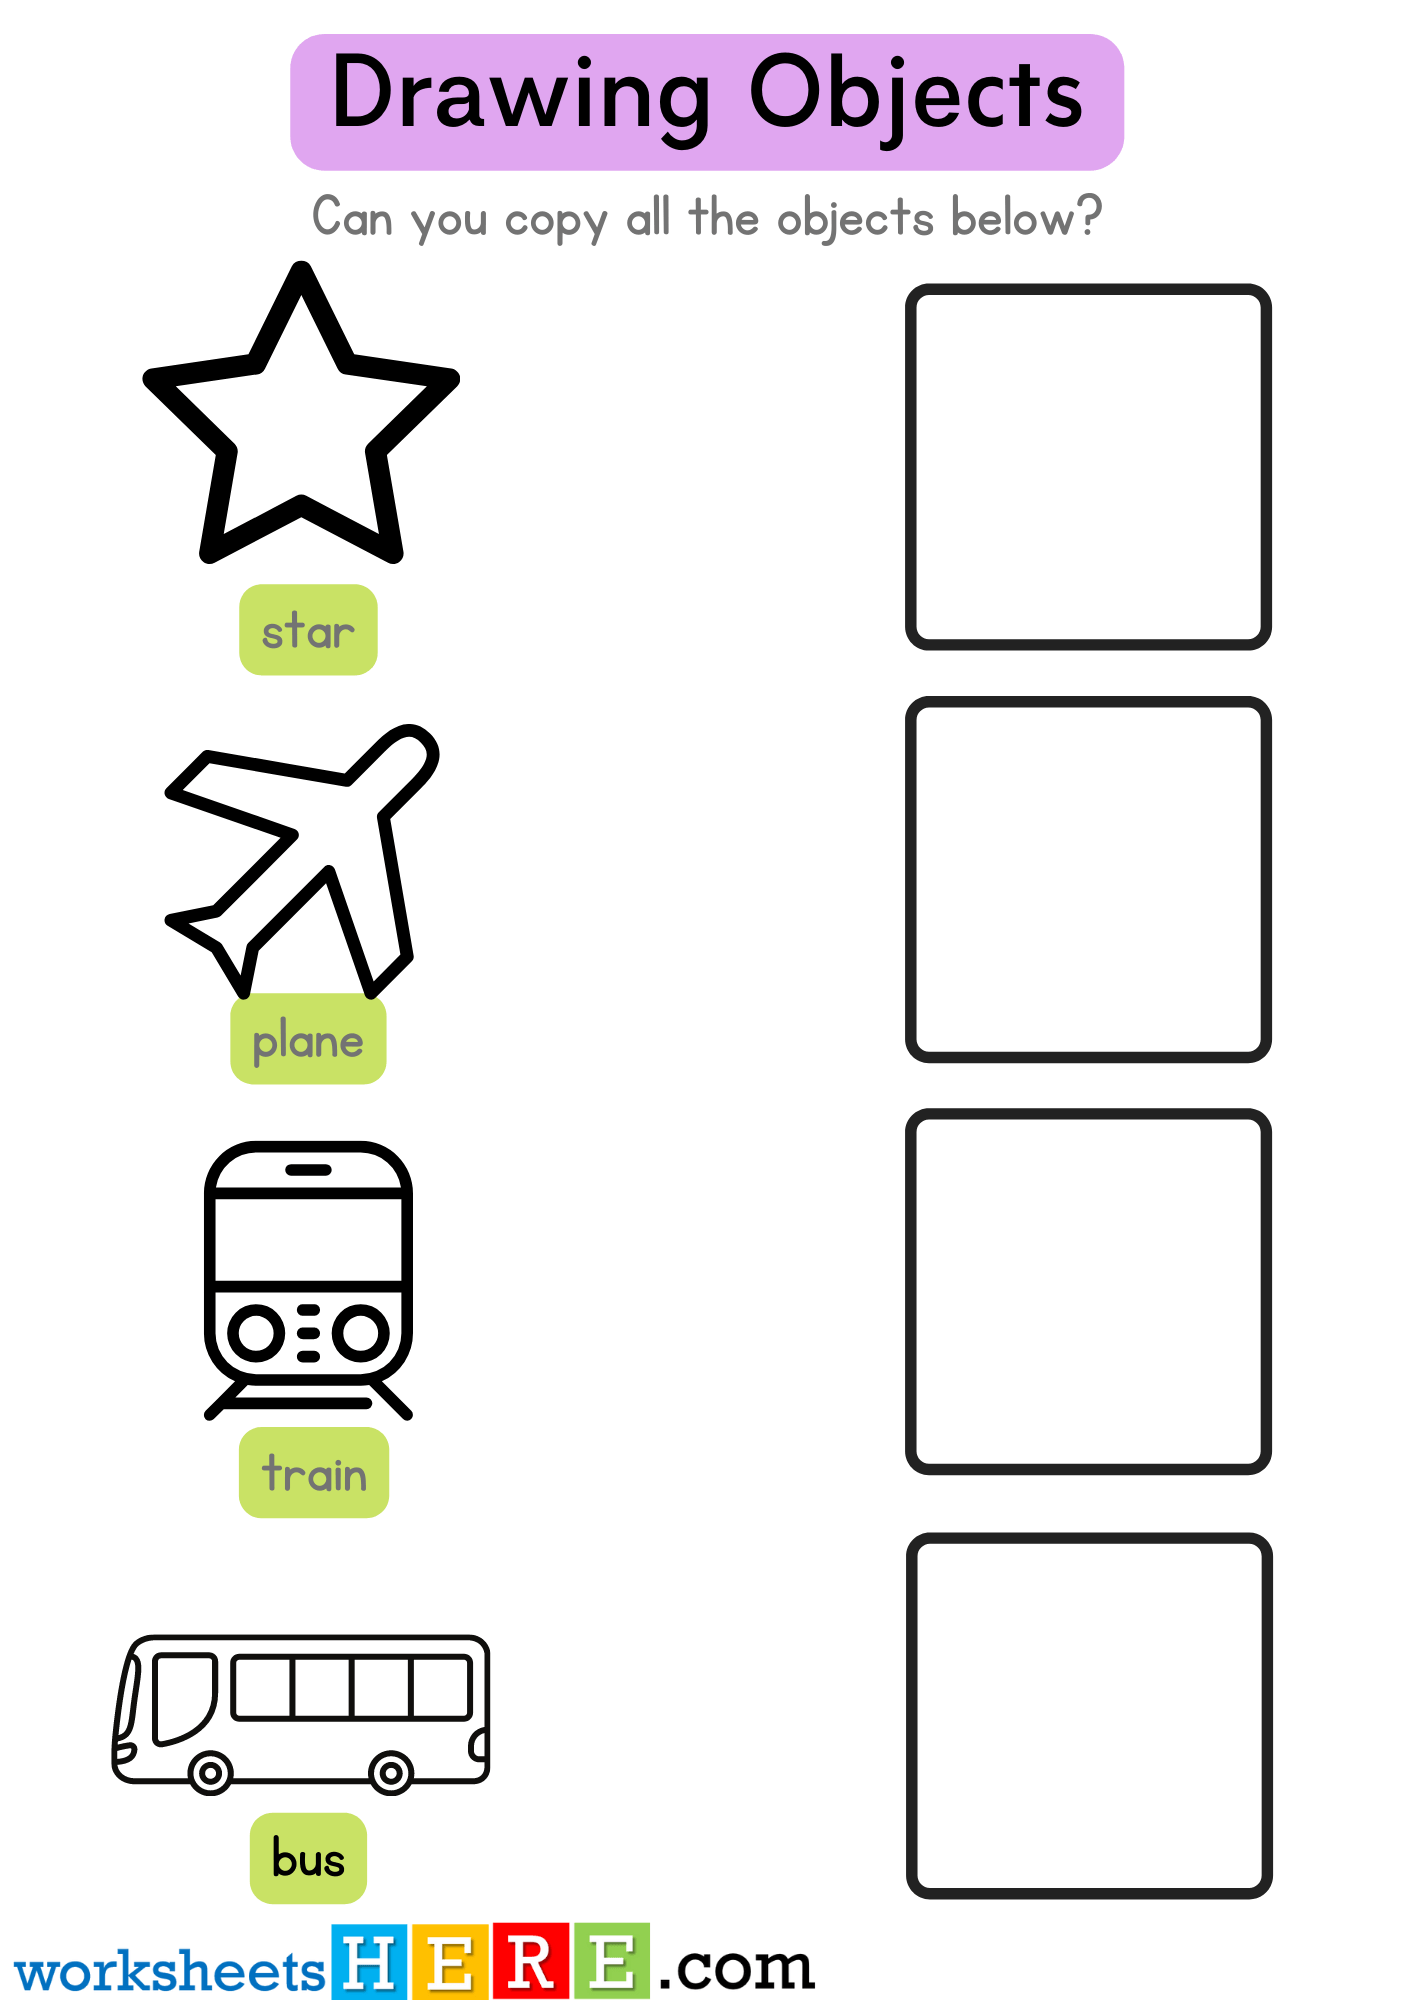 Copy All the Objects Below, Drawing Star Plane Train Bus Examples Worksheet For Kids